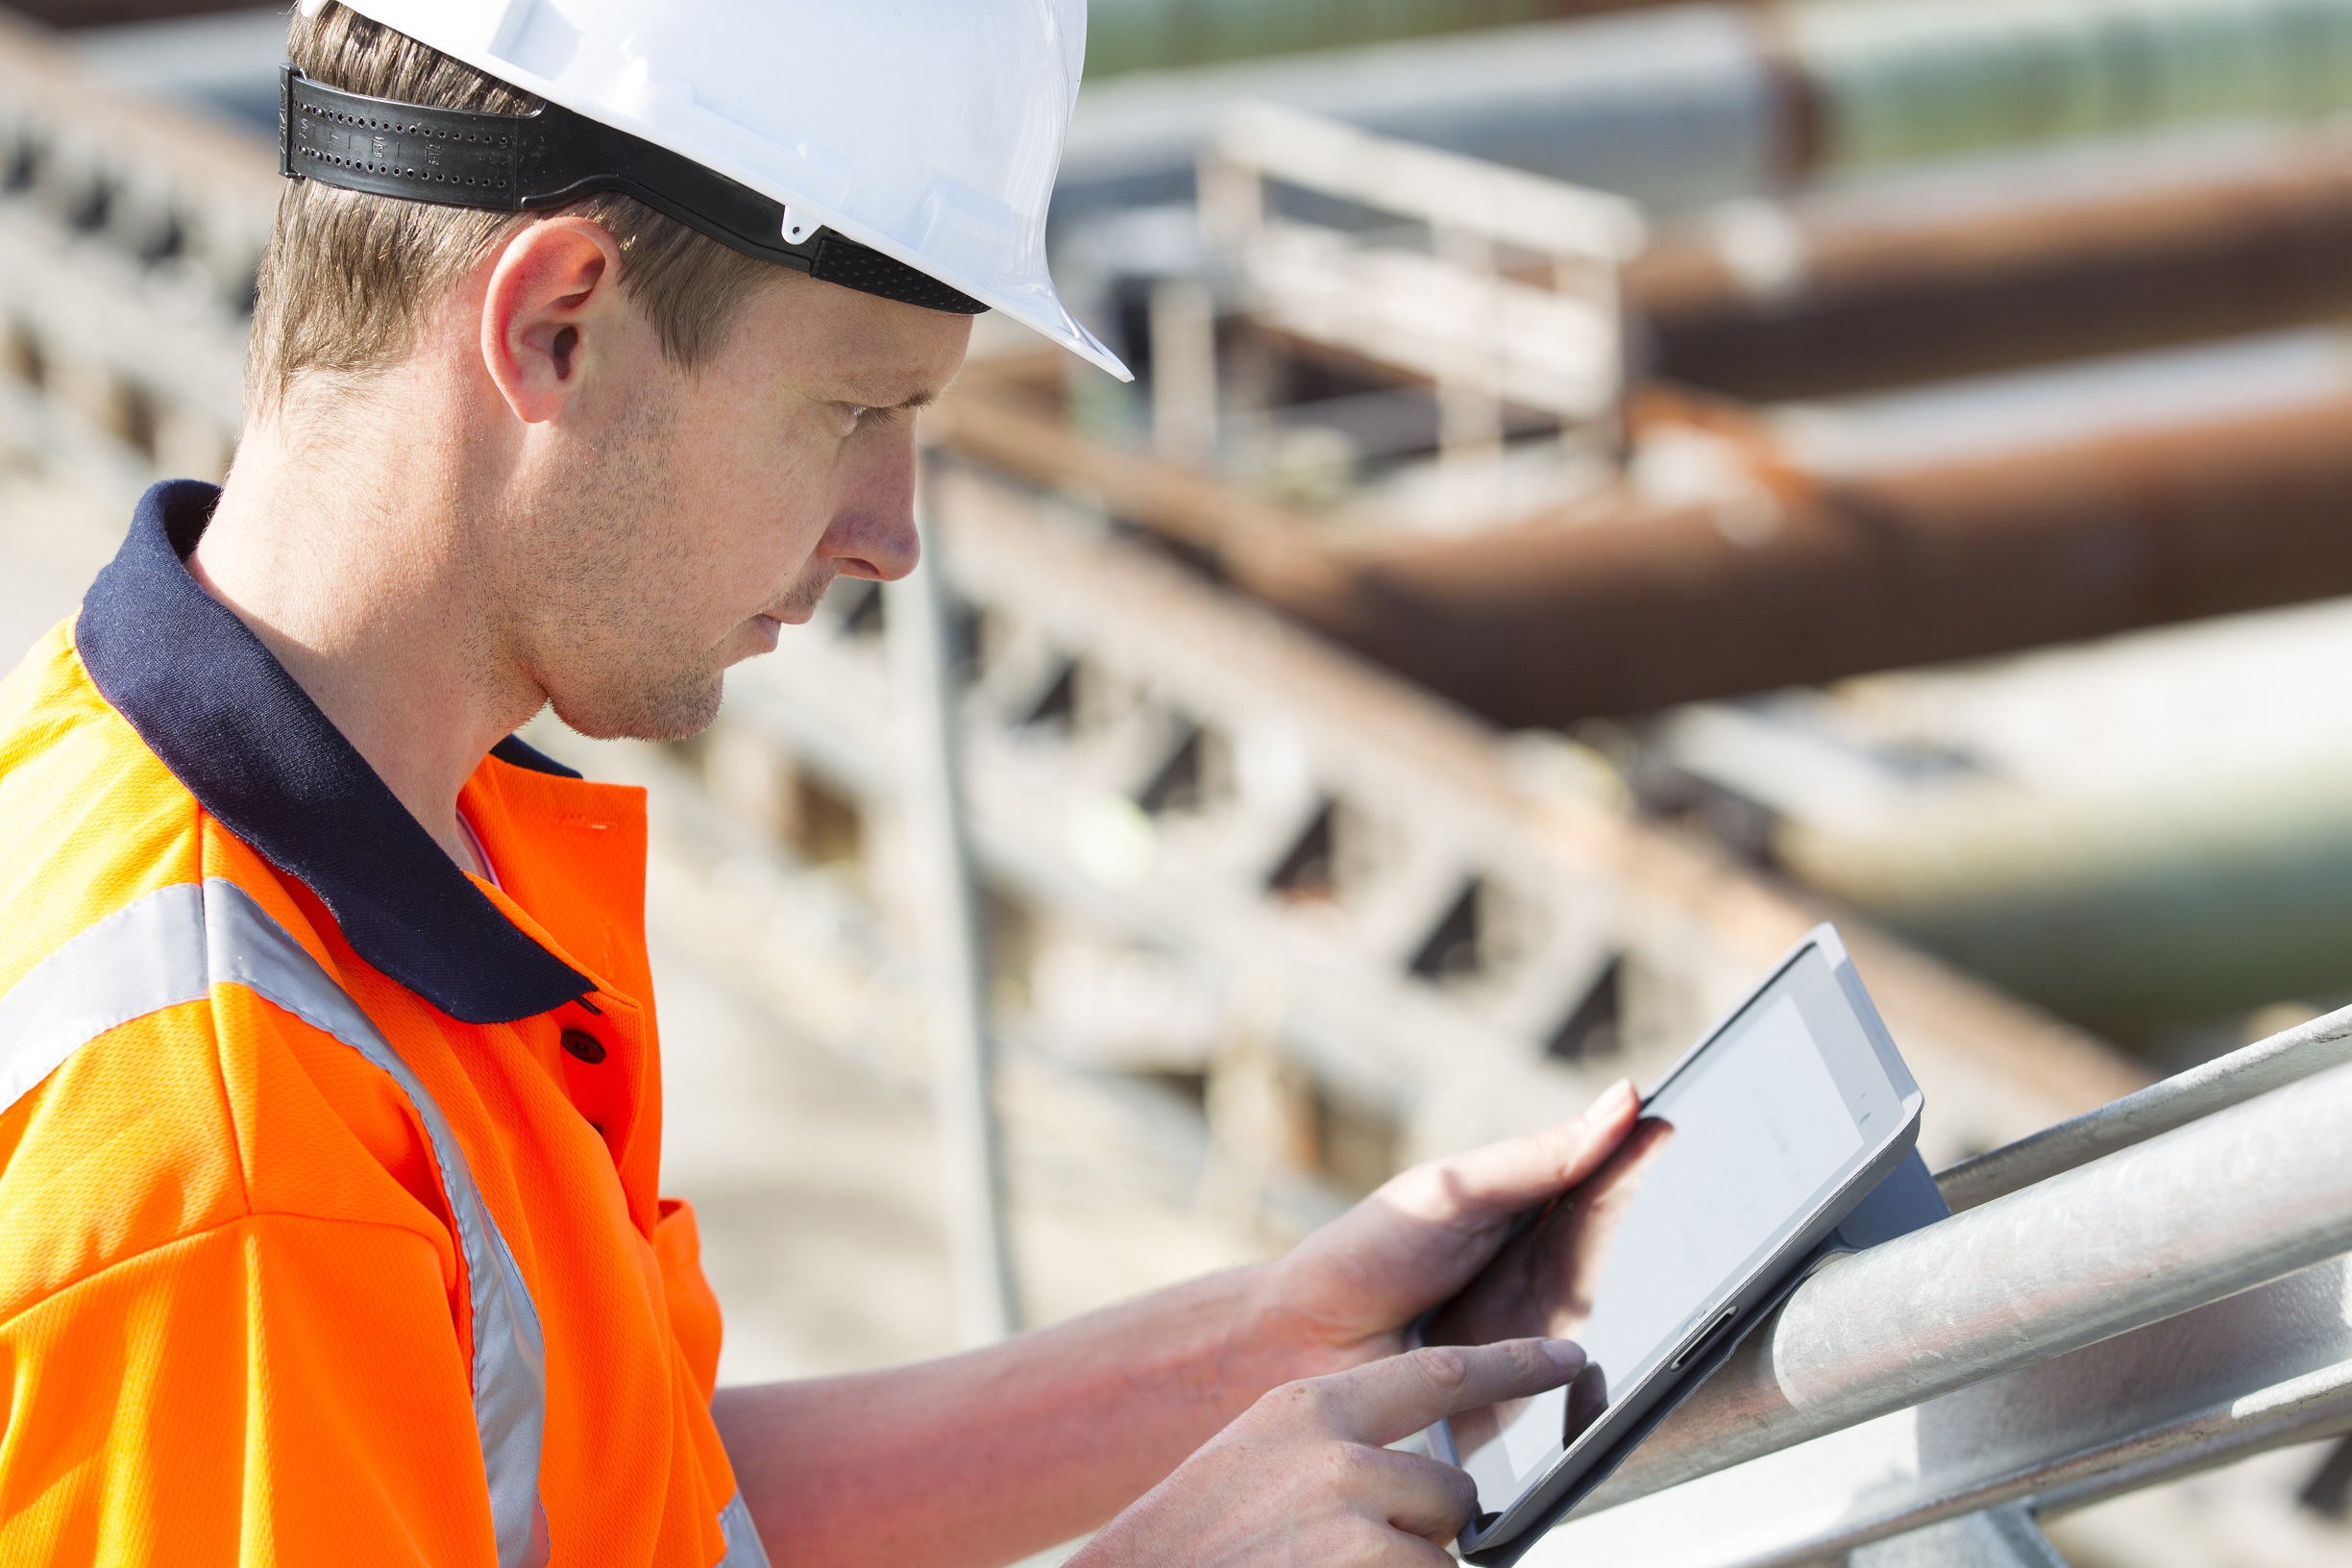 Incident Reporting App – Drives Employee Engagement in Safety